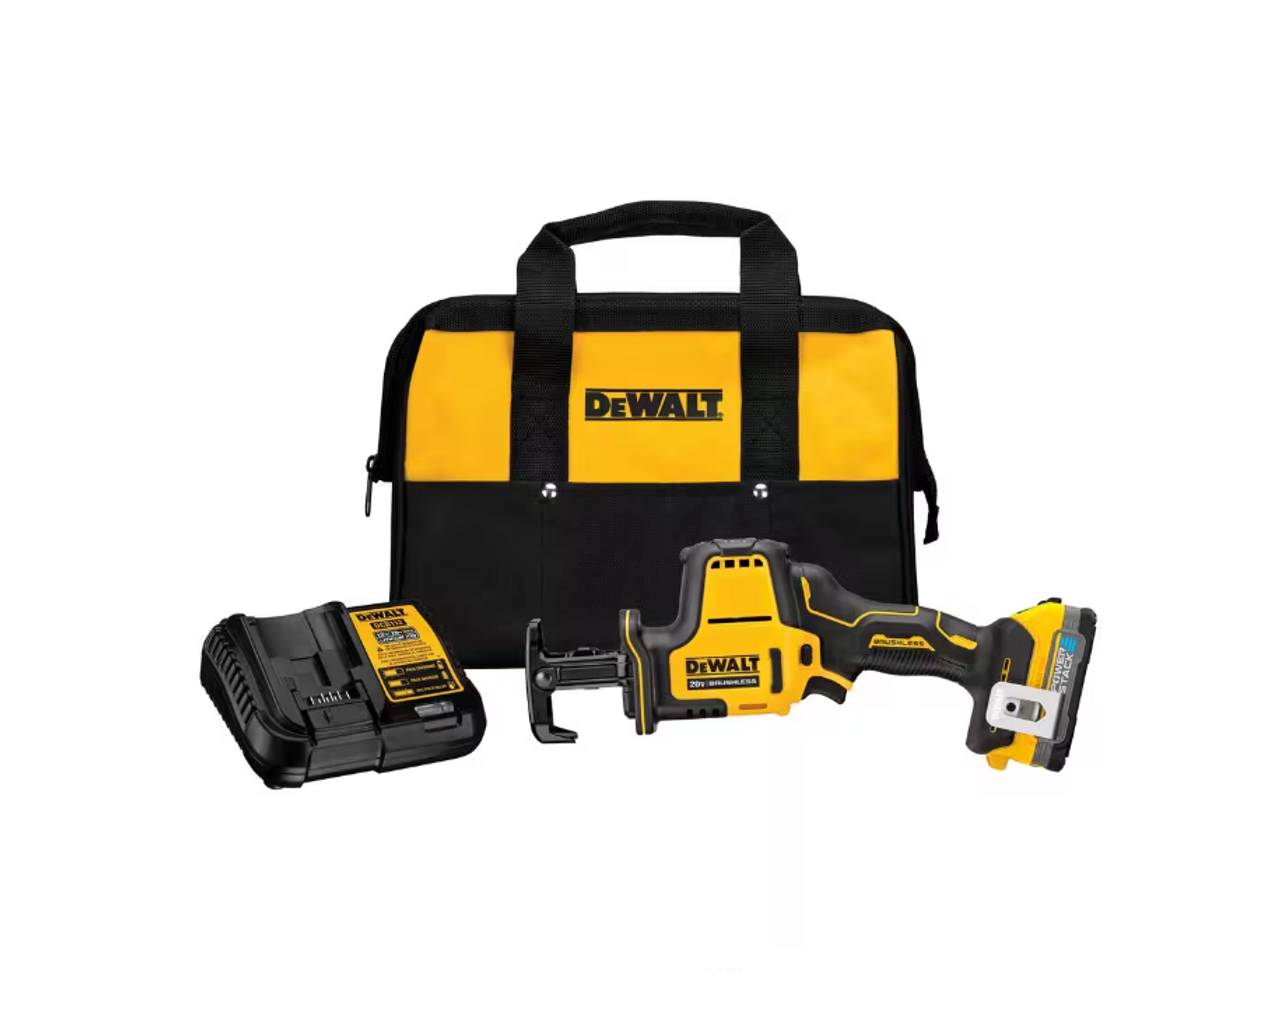 Dewalt DCS369E1 20V MAX Atomic Compact Series Brushless Reciprocating Saw  Kit (Battery  Charger)